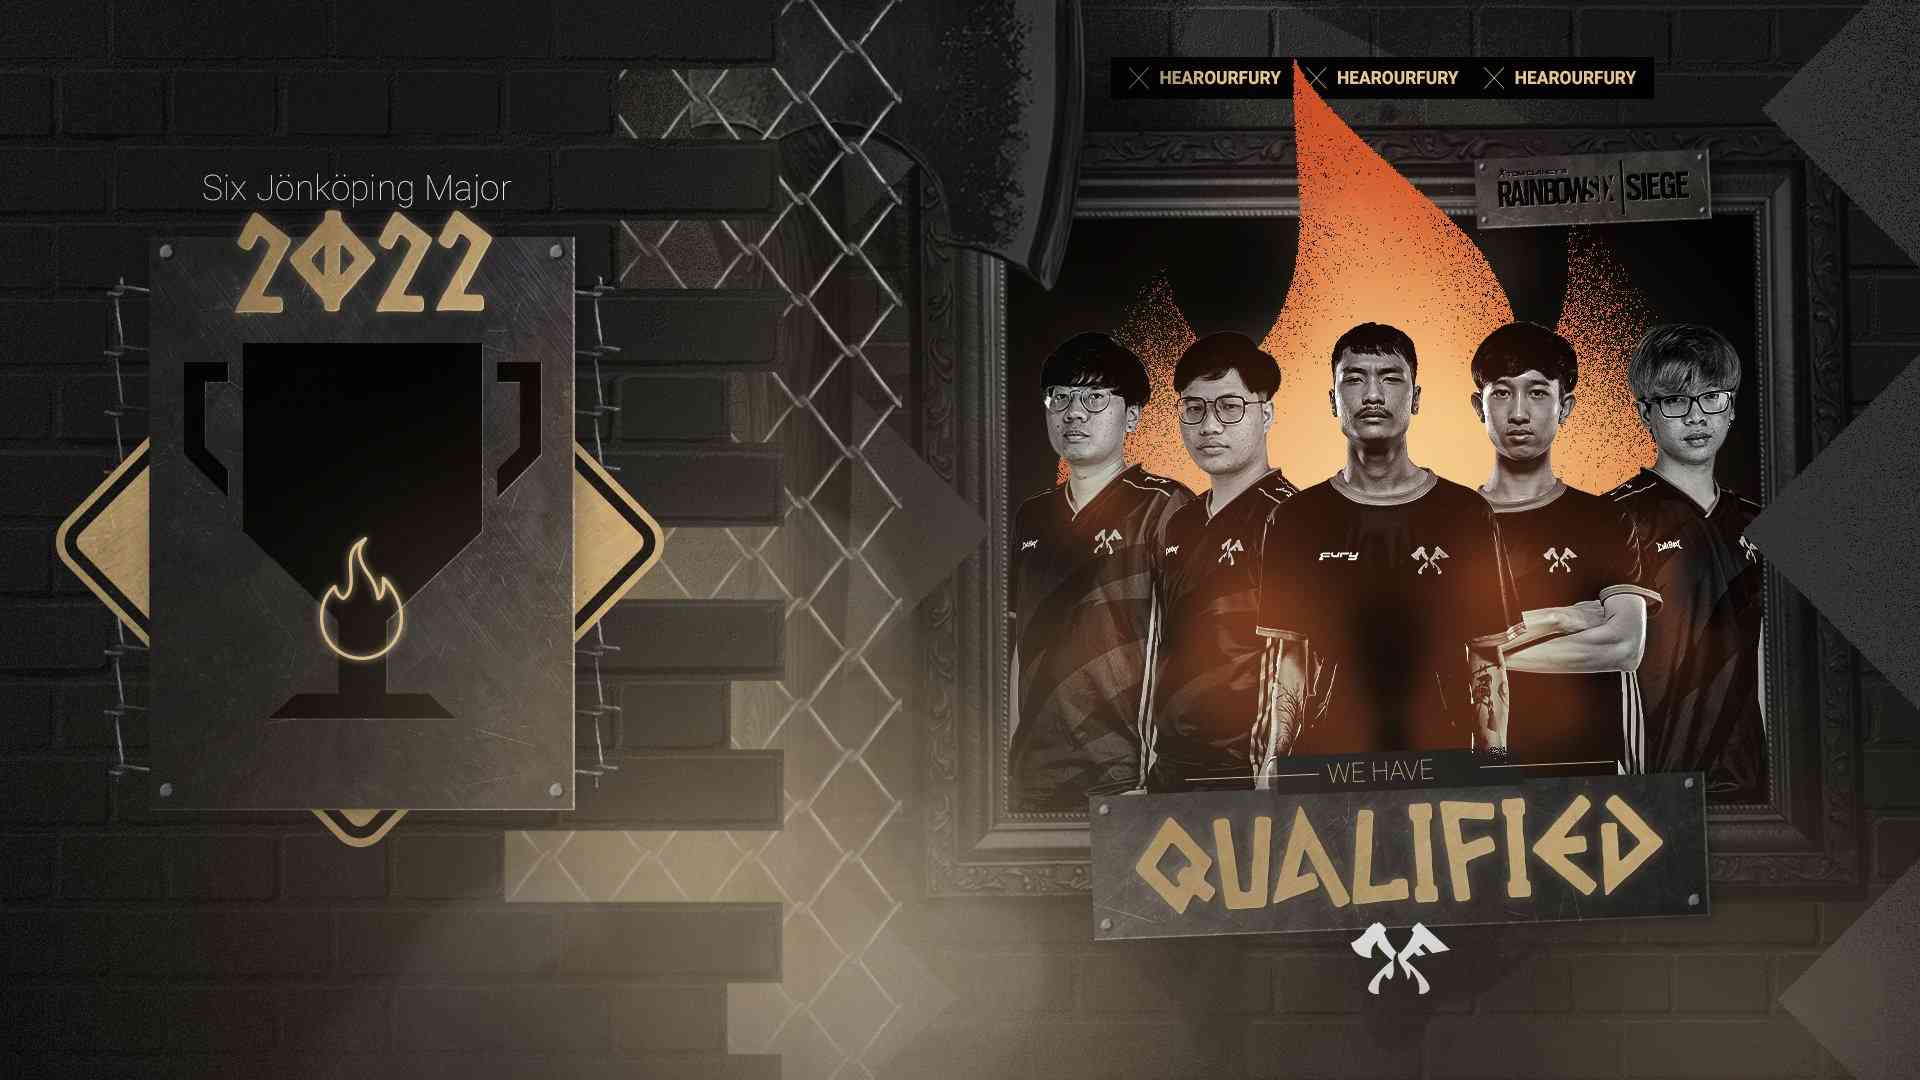 A promotional image featuring Fury's R6 roster, celebrating their qualification to the Six Major Jönköping